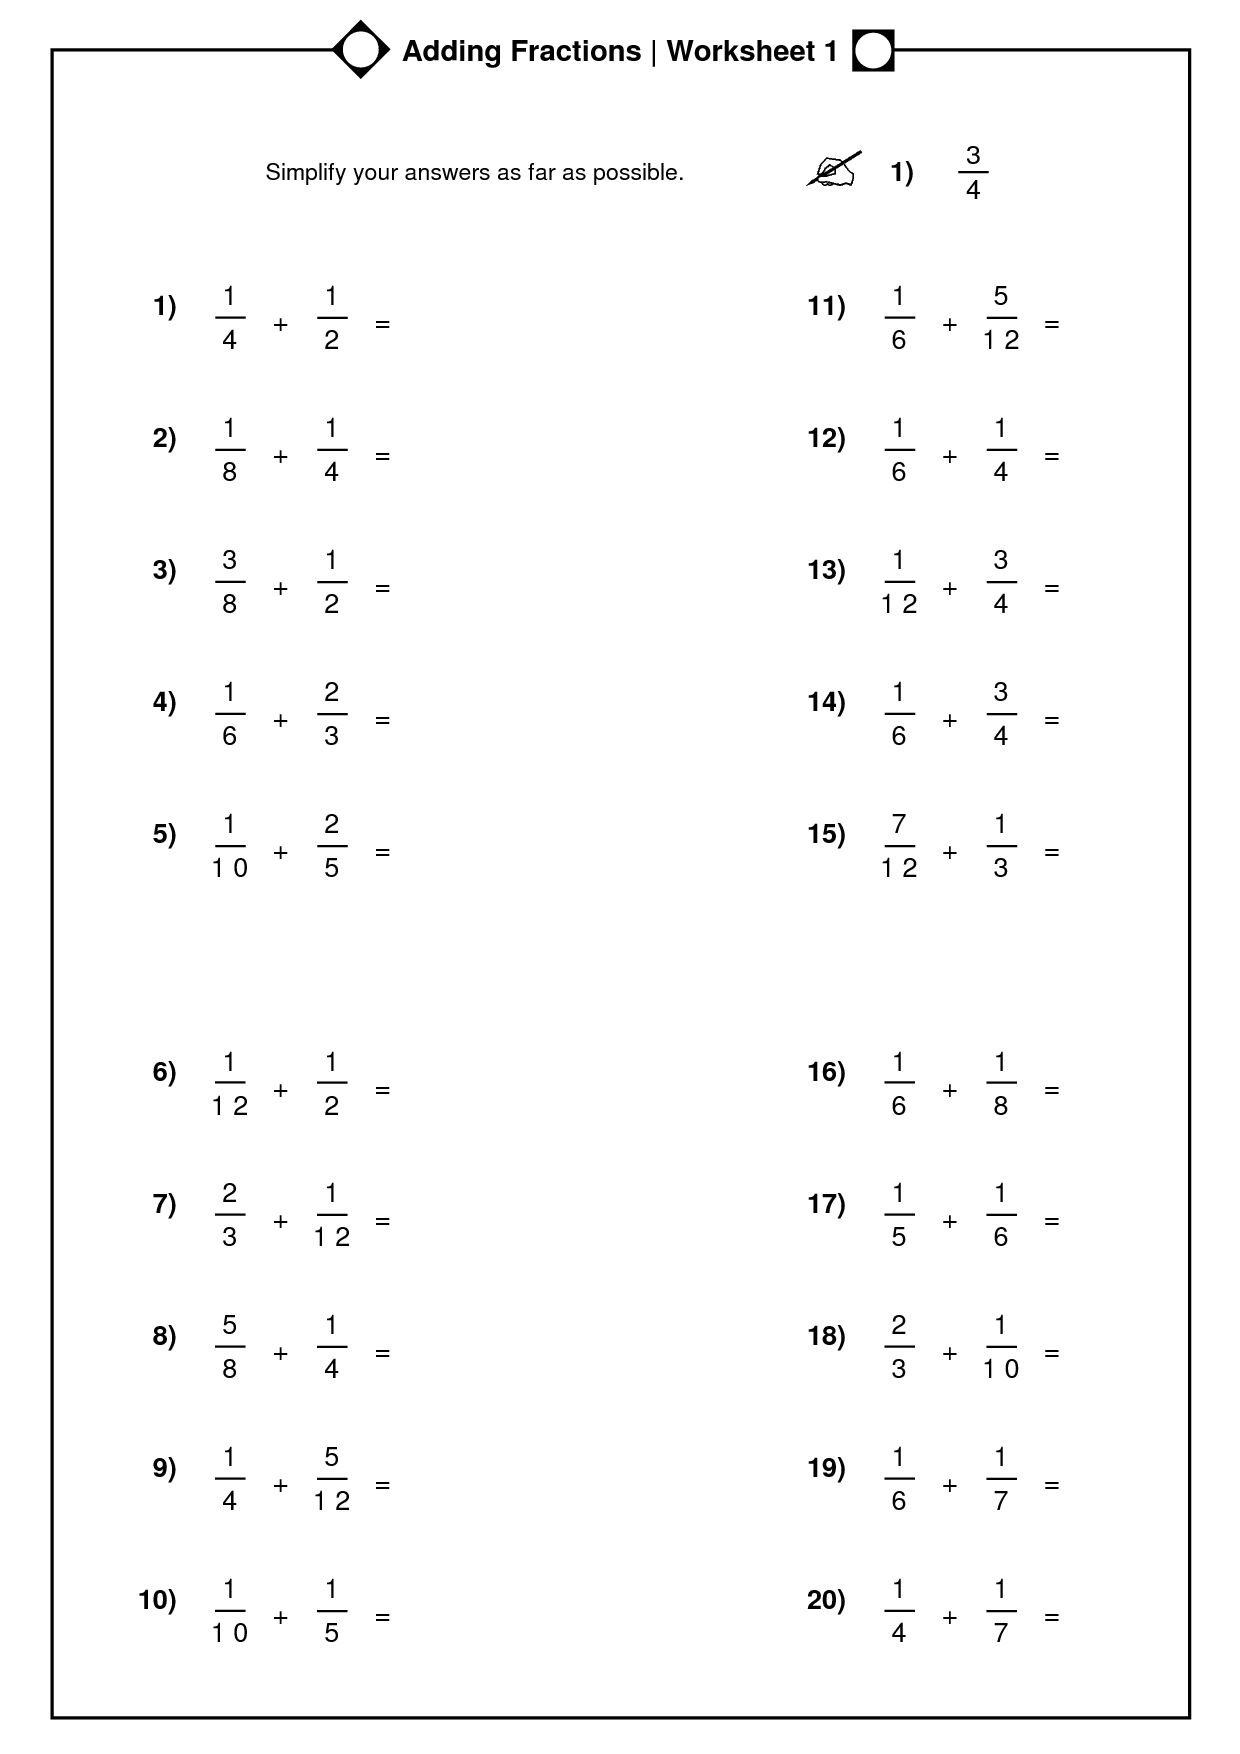 fractions-and-mixed-numbers-worksheet